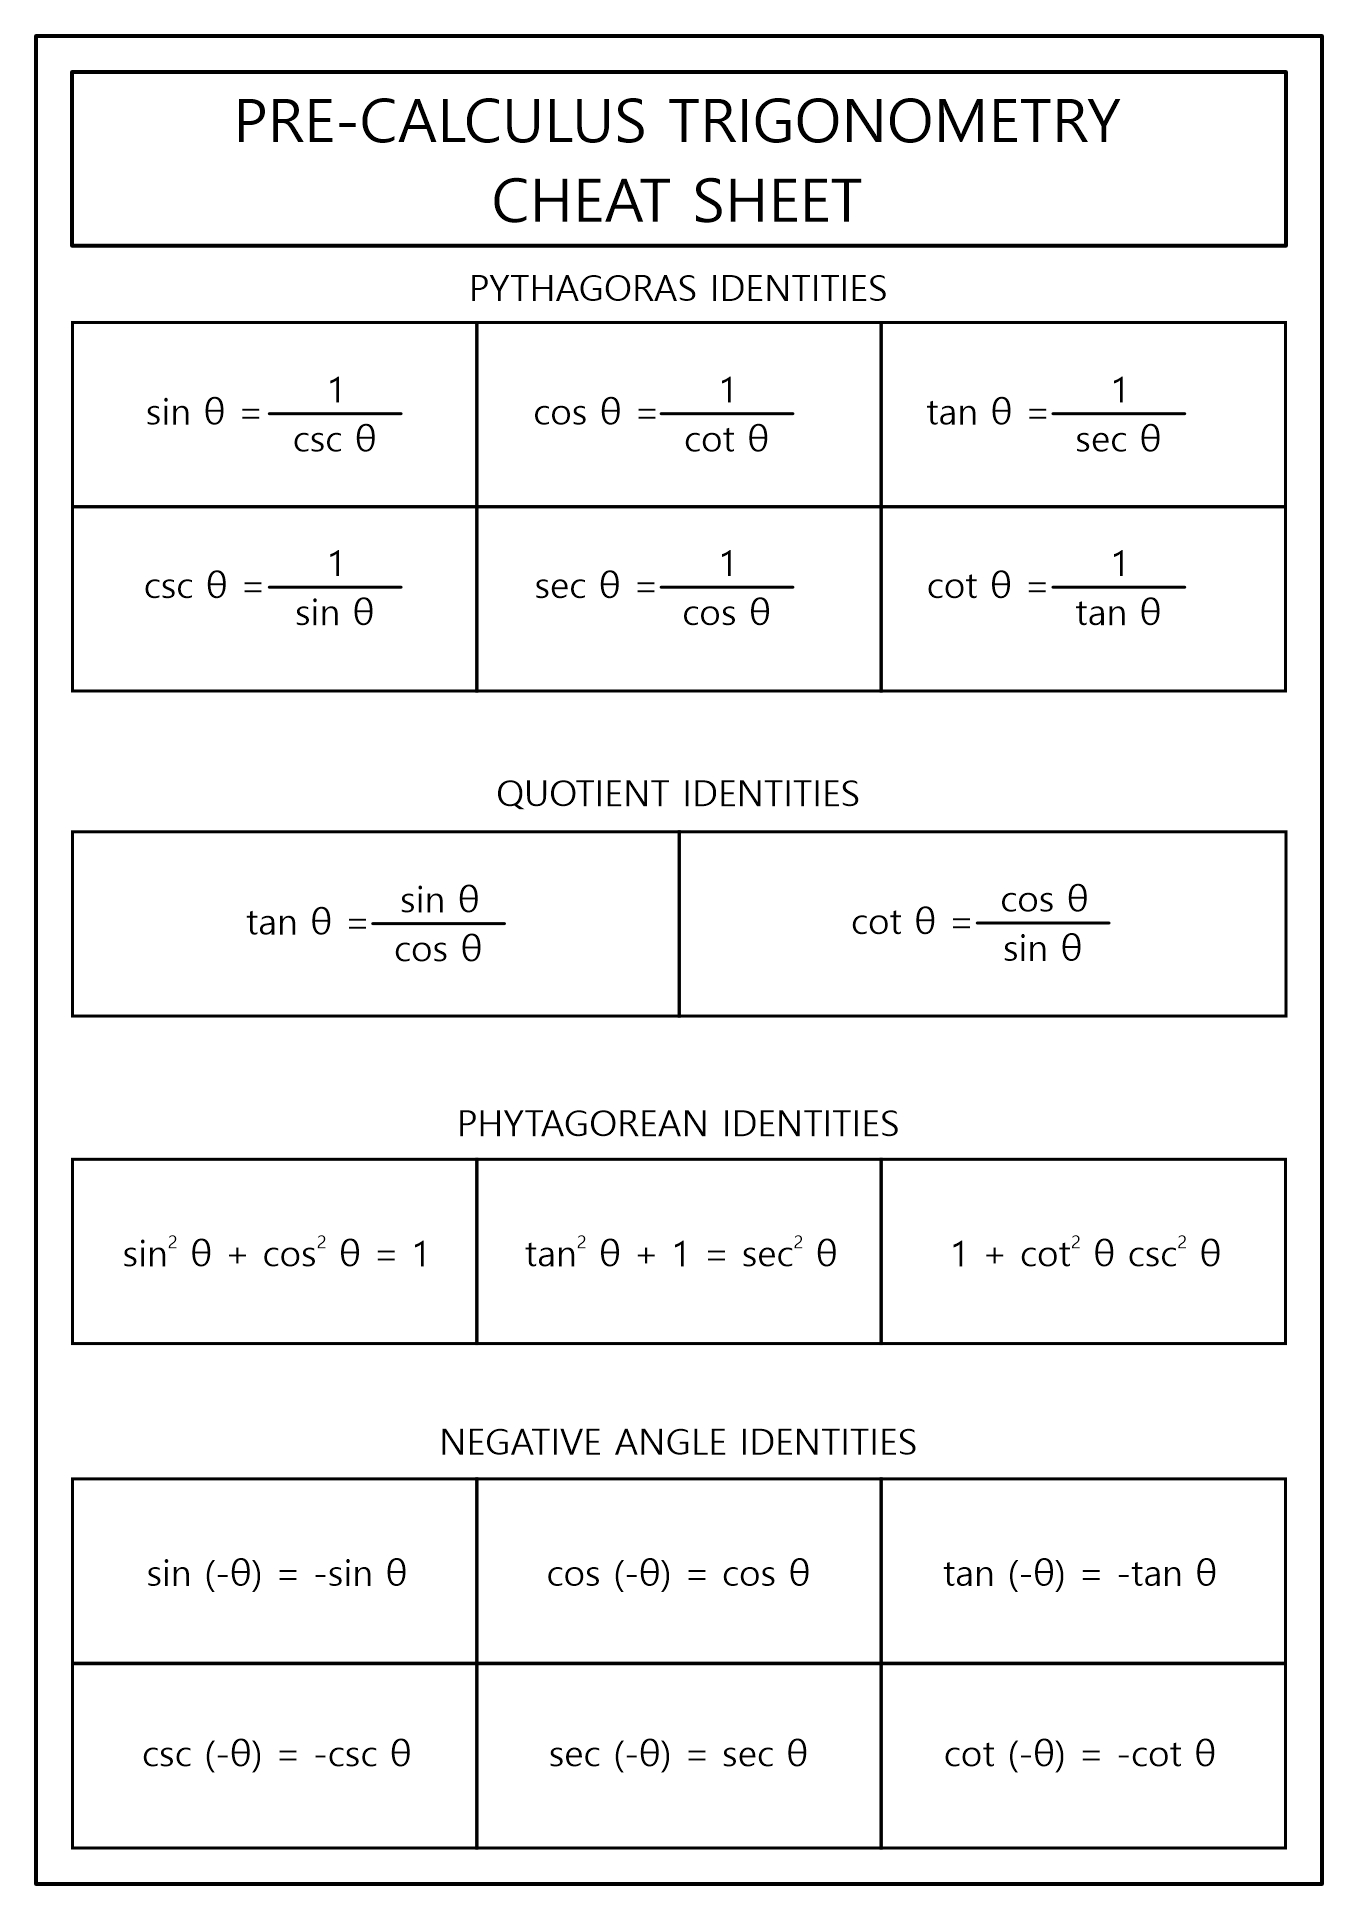 13-best-images-of-college-trigonometry-worksheets-pre-calculus-trigonometry-cheat-sheet